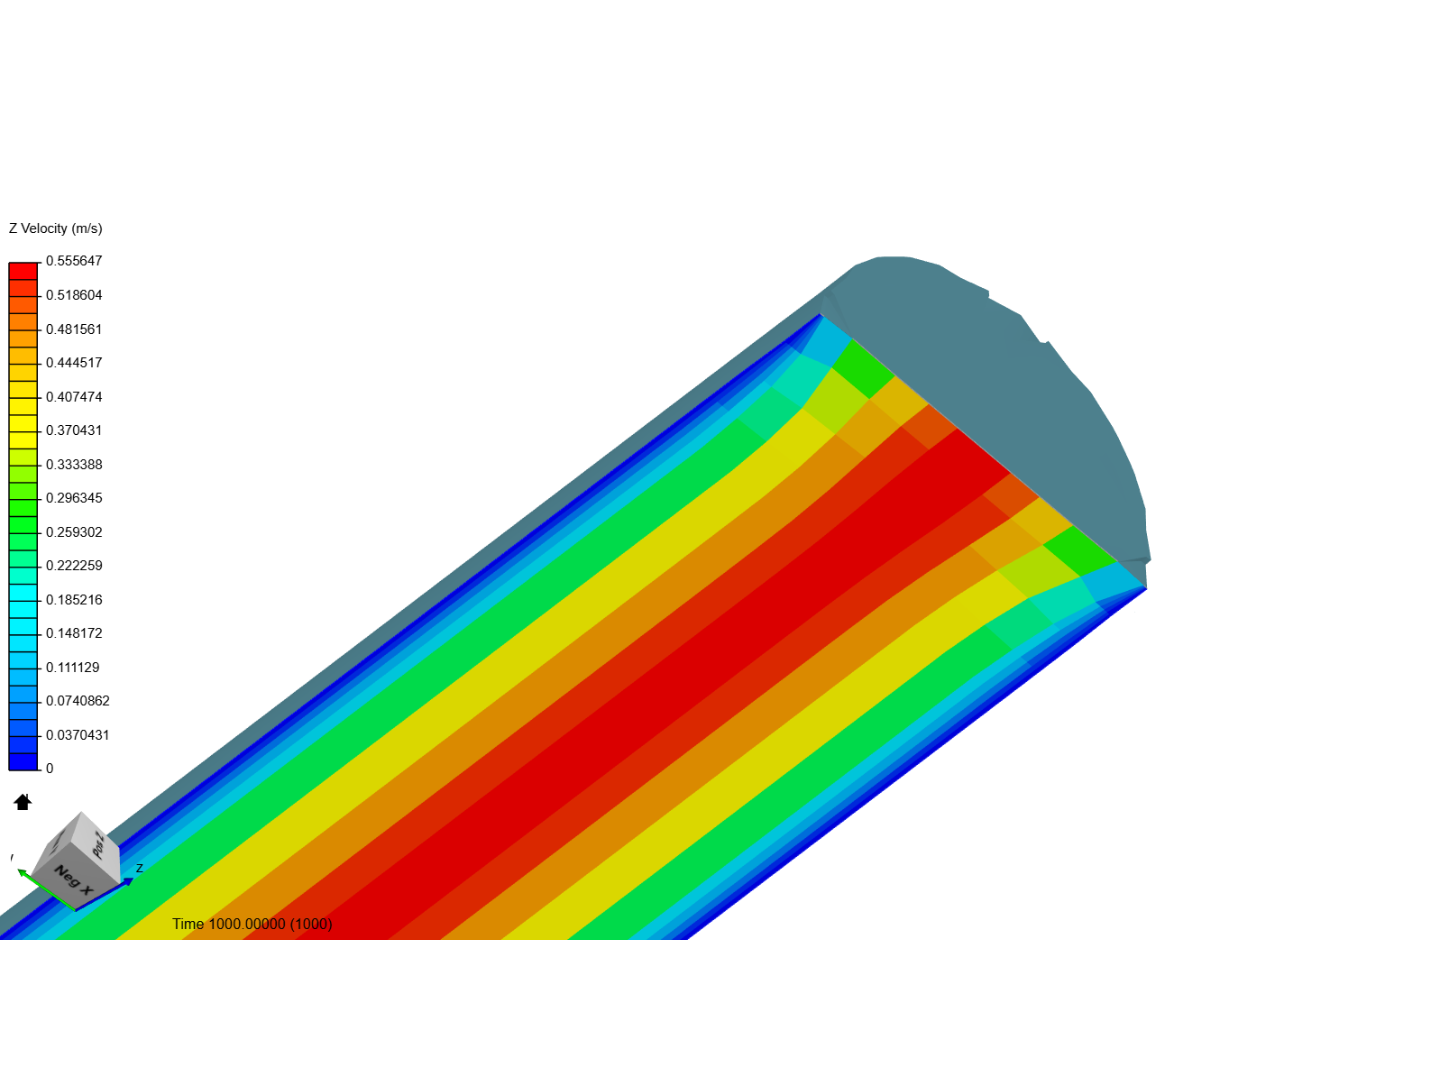 Laminar Flow In A Pipe image